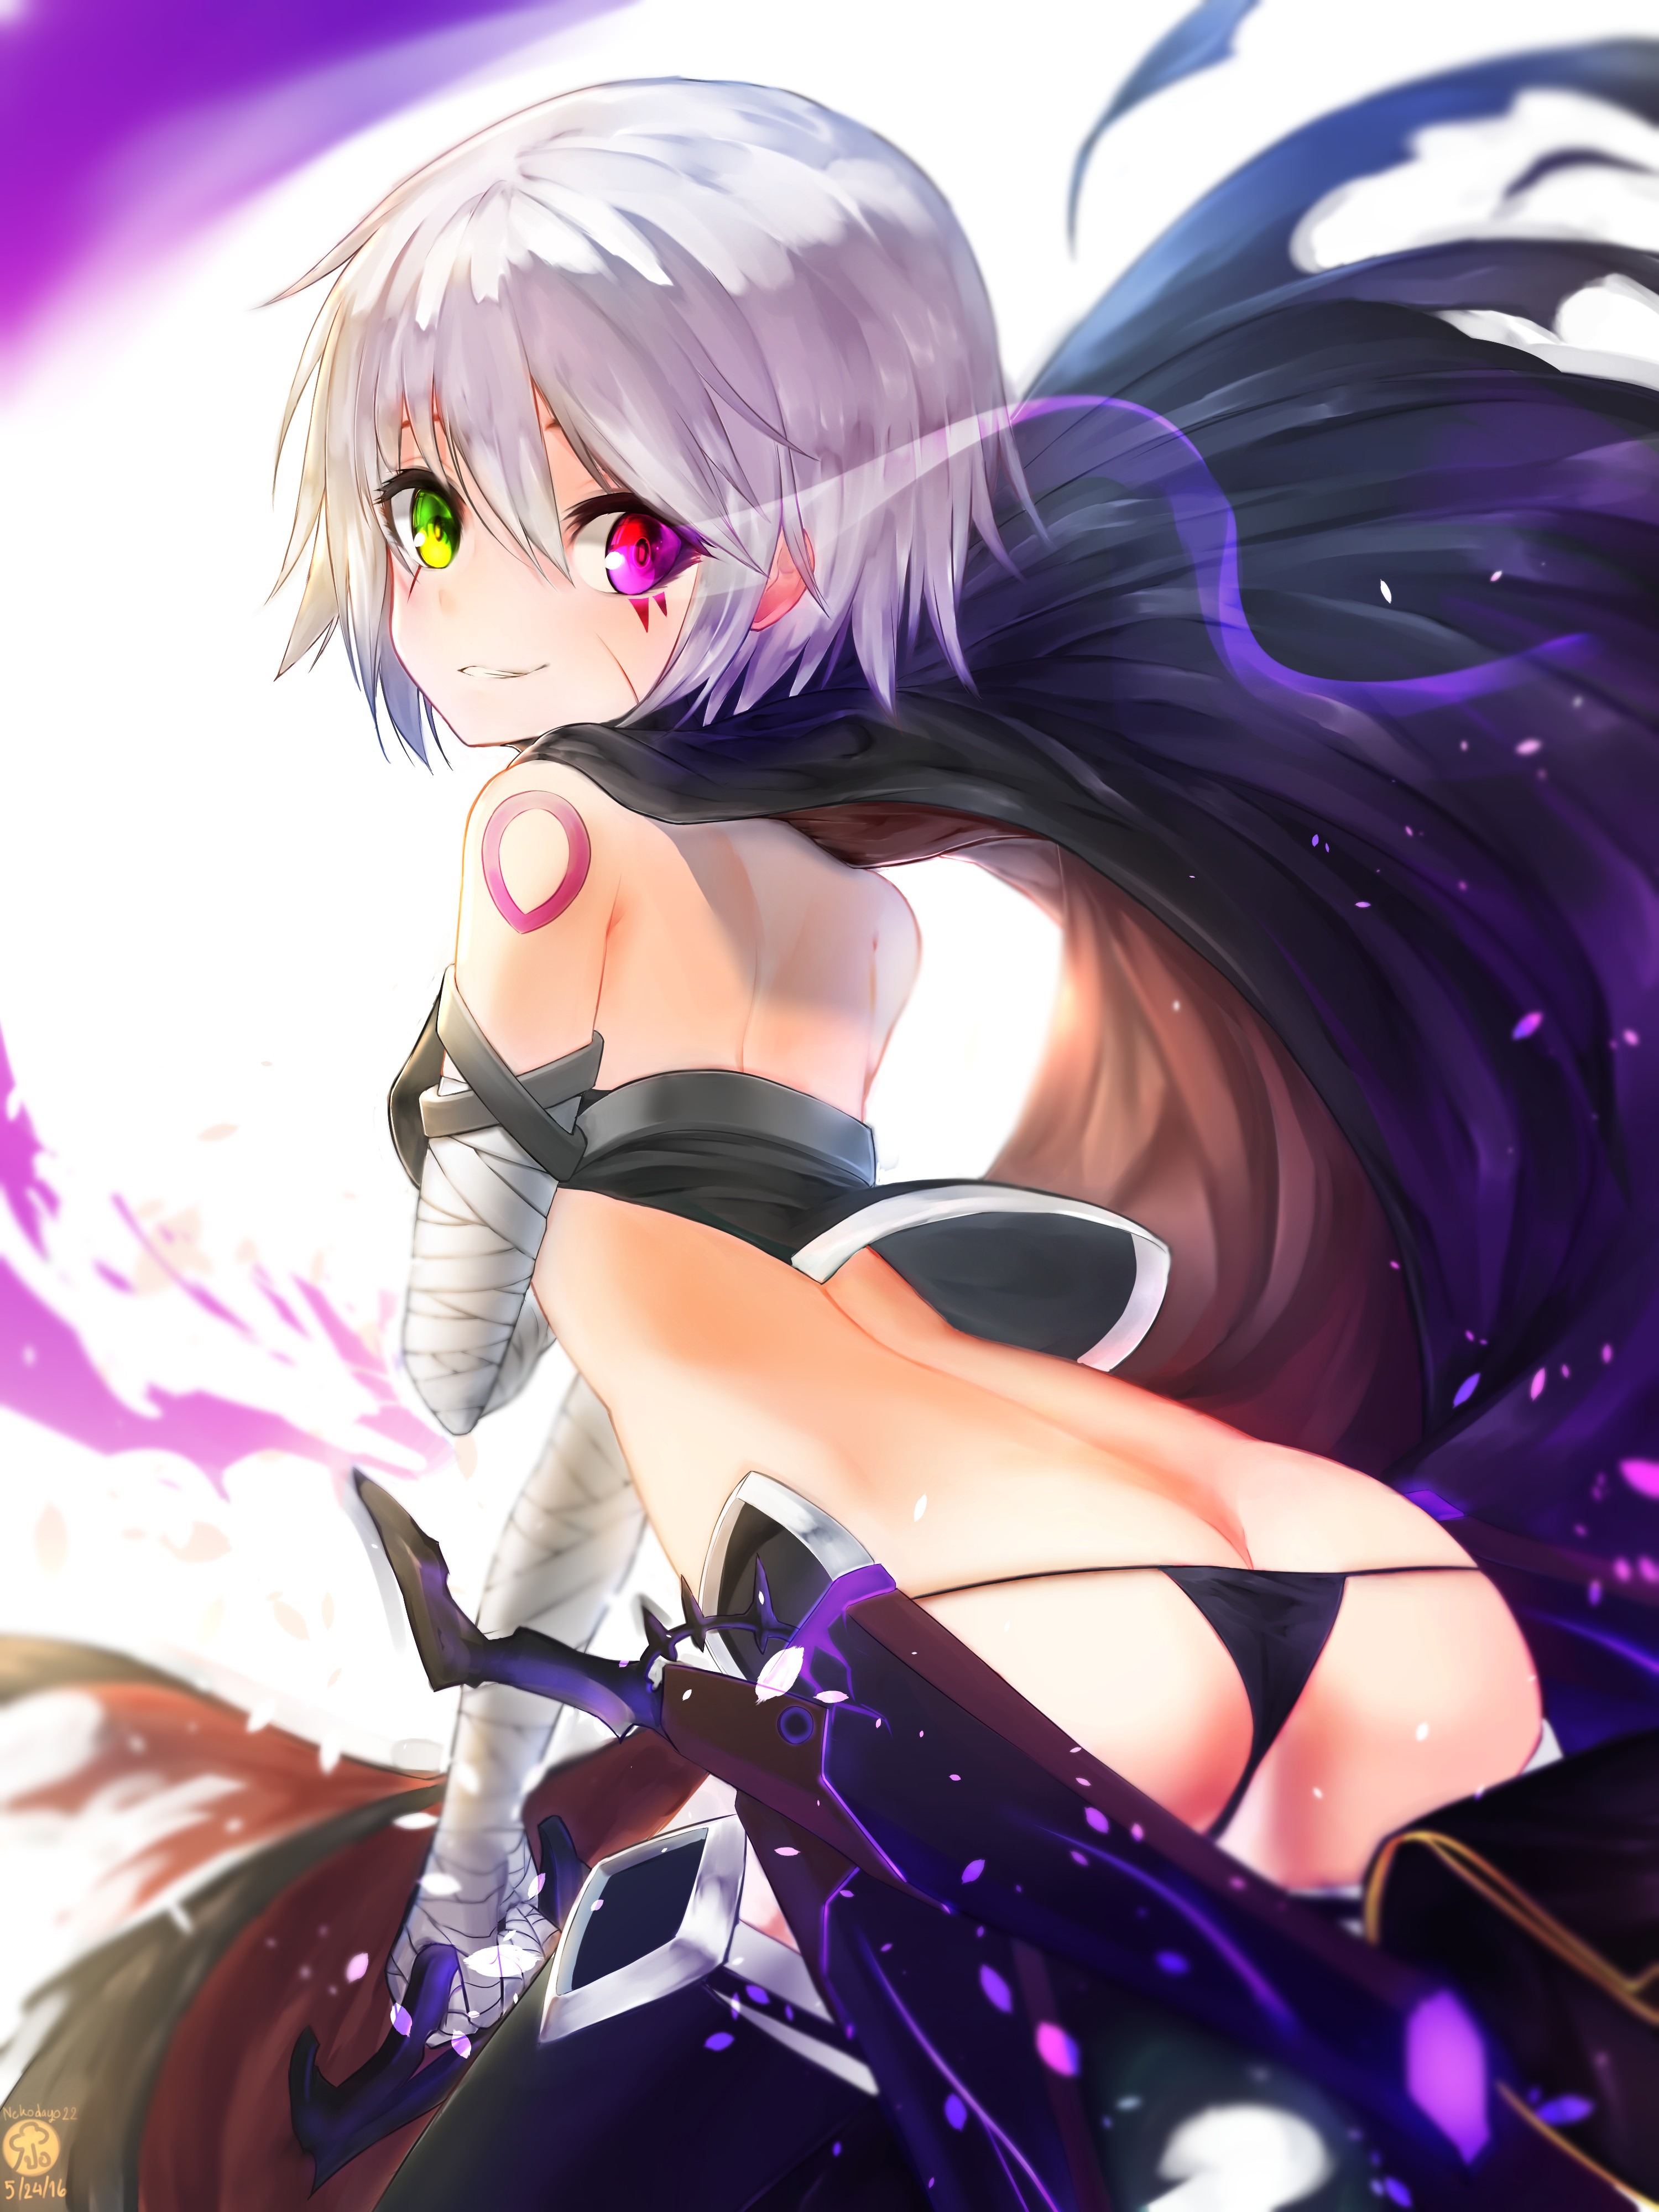 Anime 3000x4000 anime girls Fate/Apocrypha  Assassin of Black ass heterochromia short hair Fate series Jack the Ripper (Fate/Apocrypha) loli rear view shoulder length hair looking over shoulder Pixiv anime